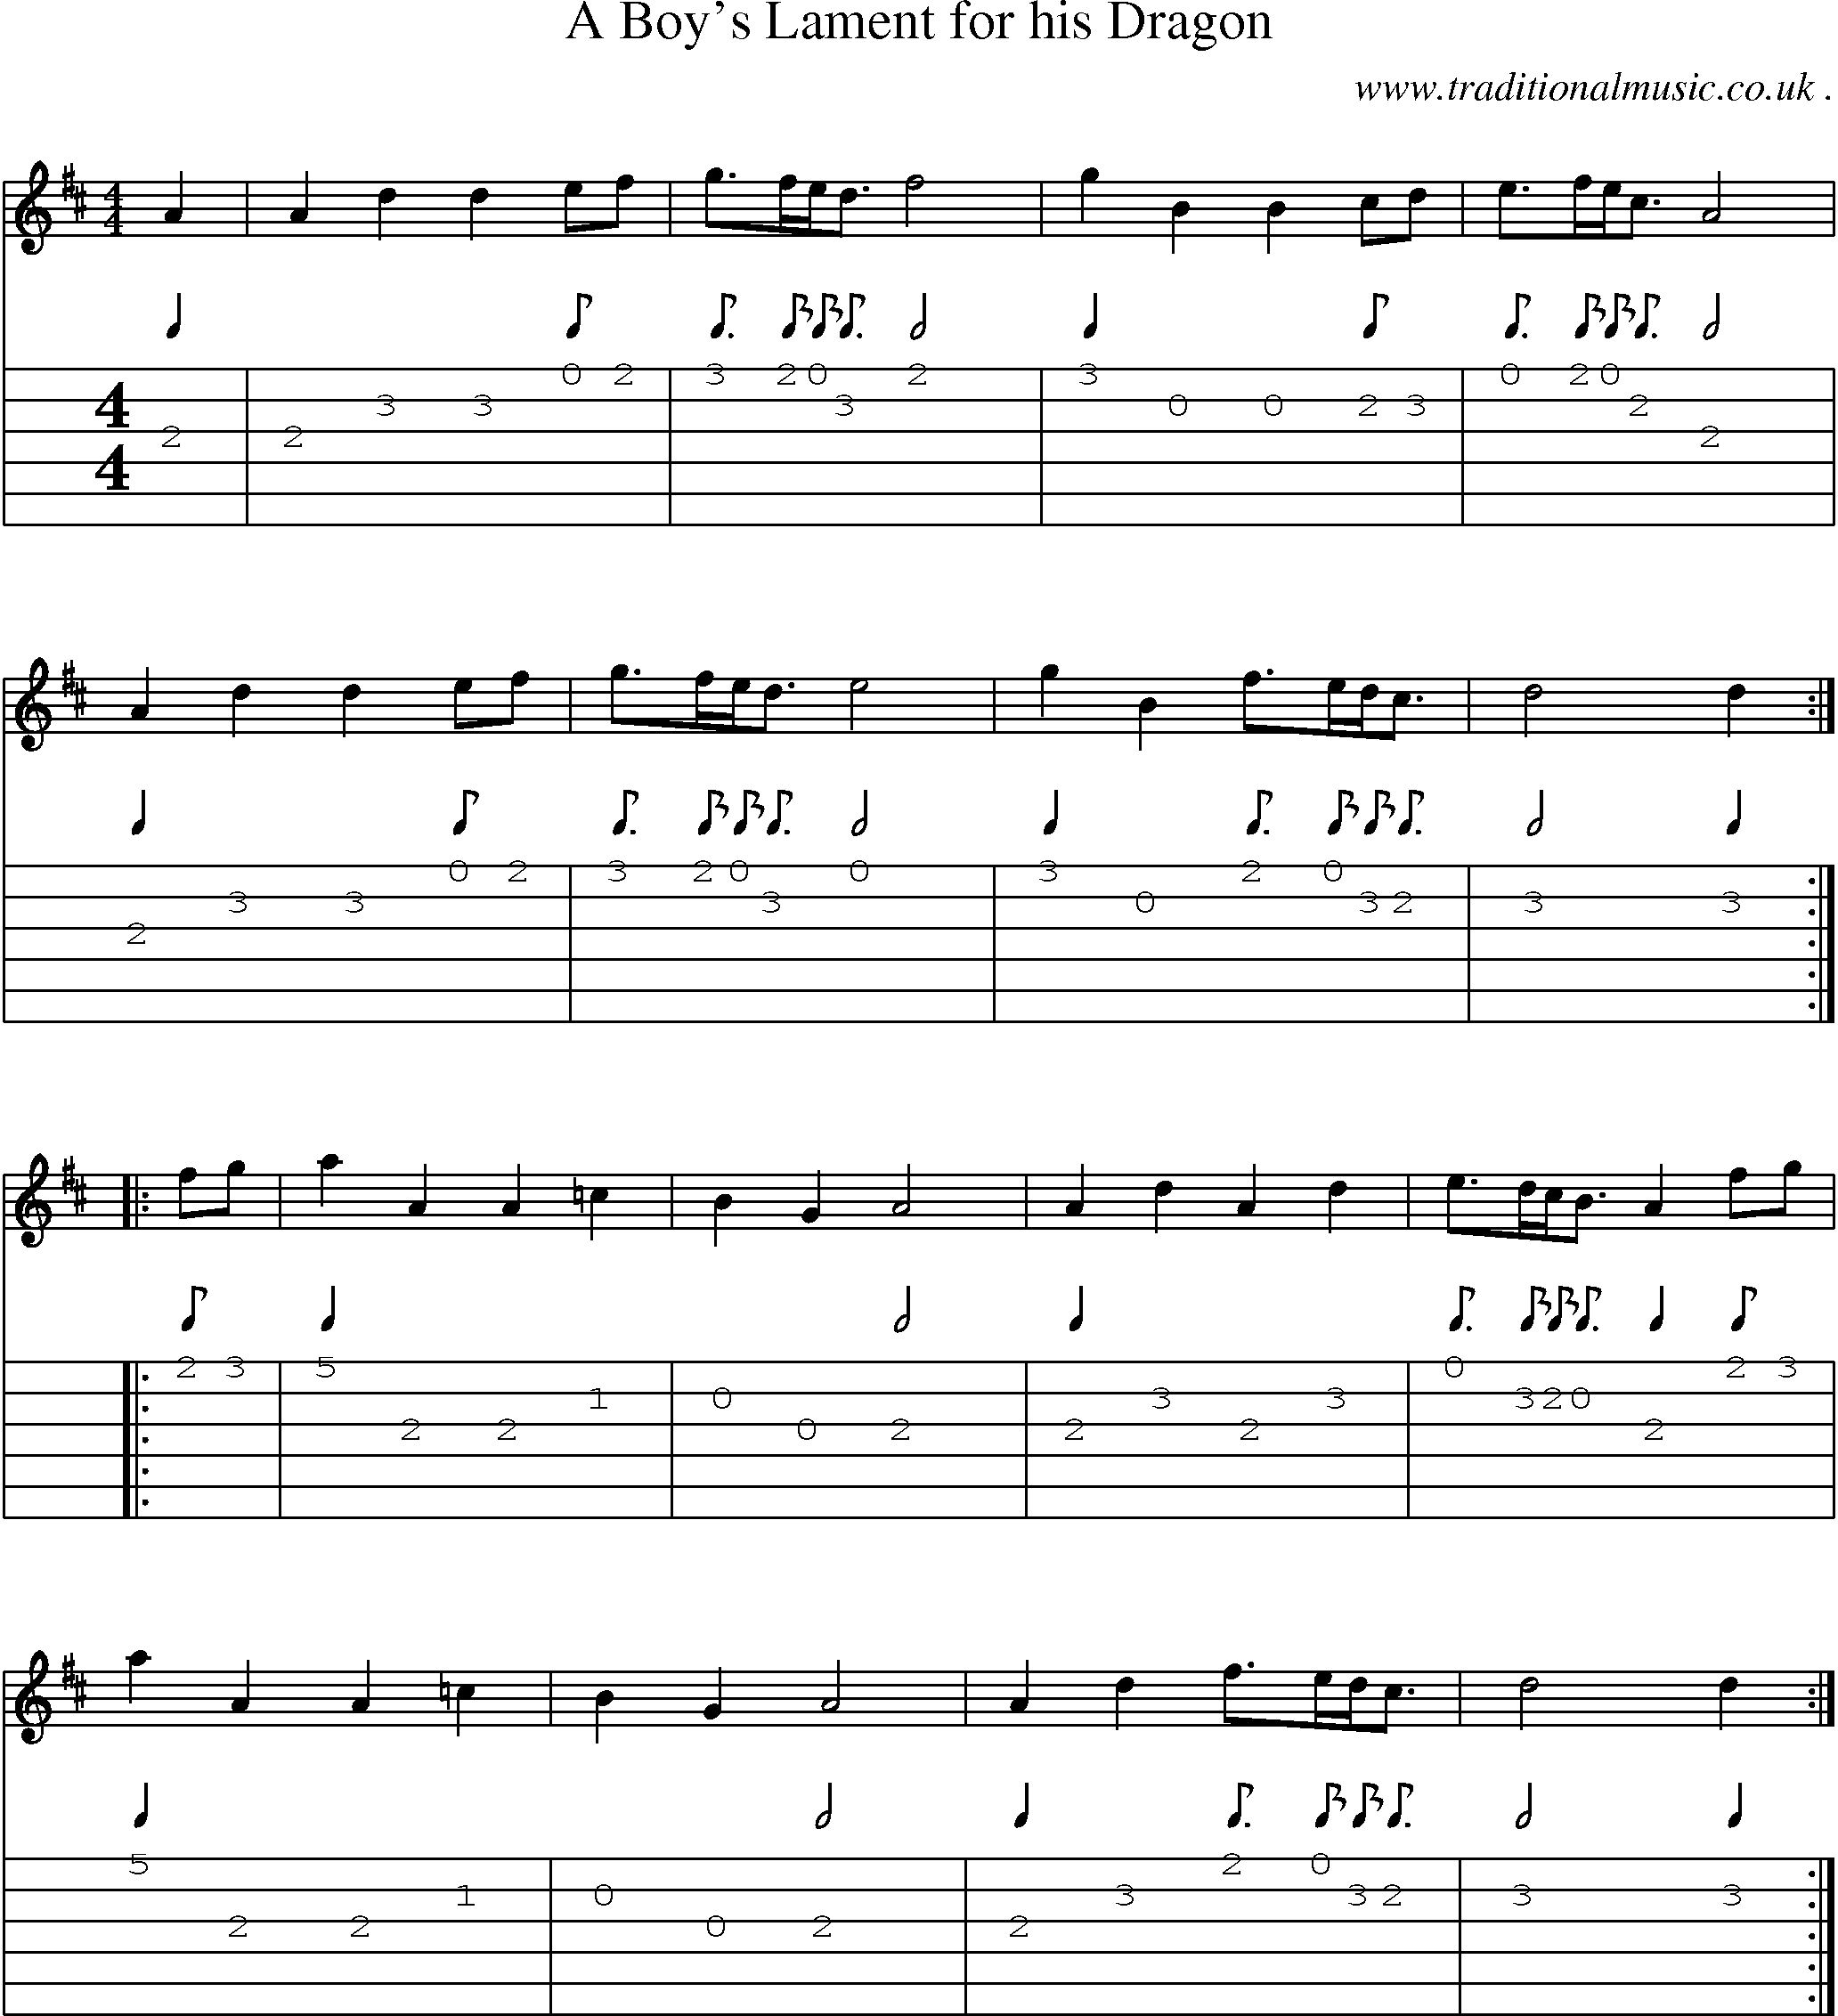 Sheet-music  score, Chords and Guitar Tabs for A Boys Lament For His Dragon